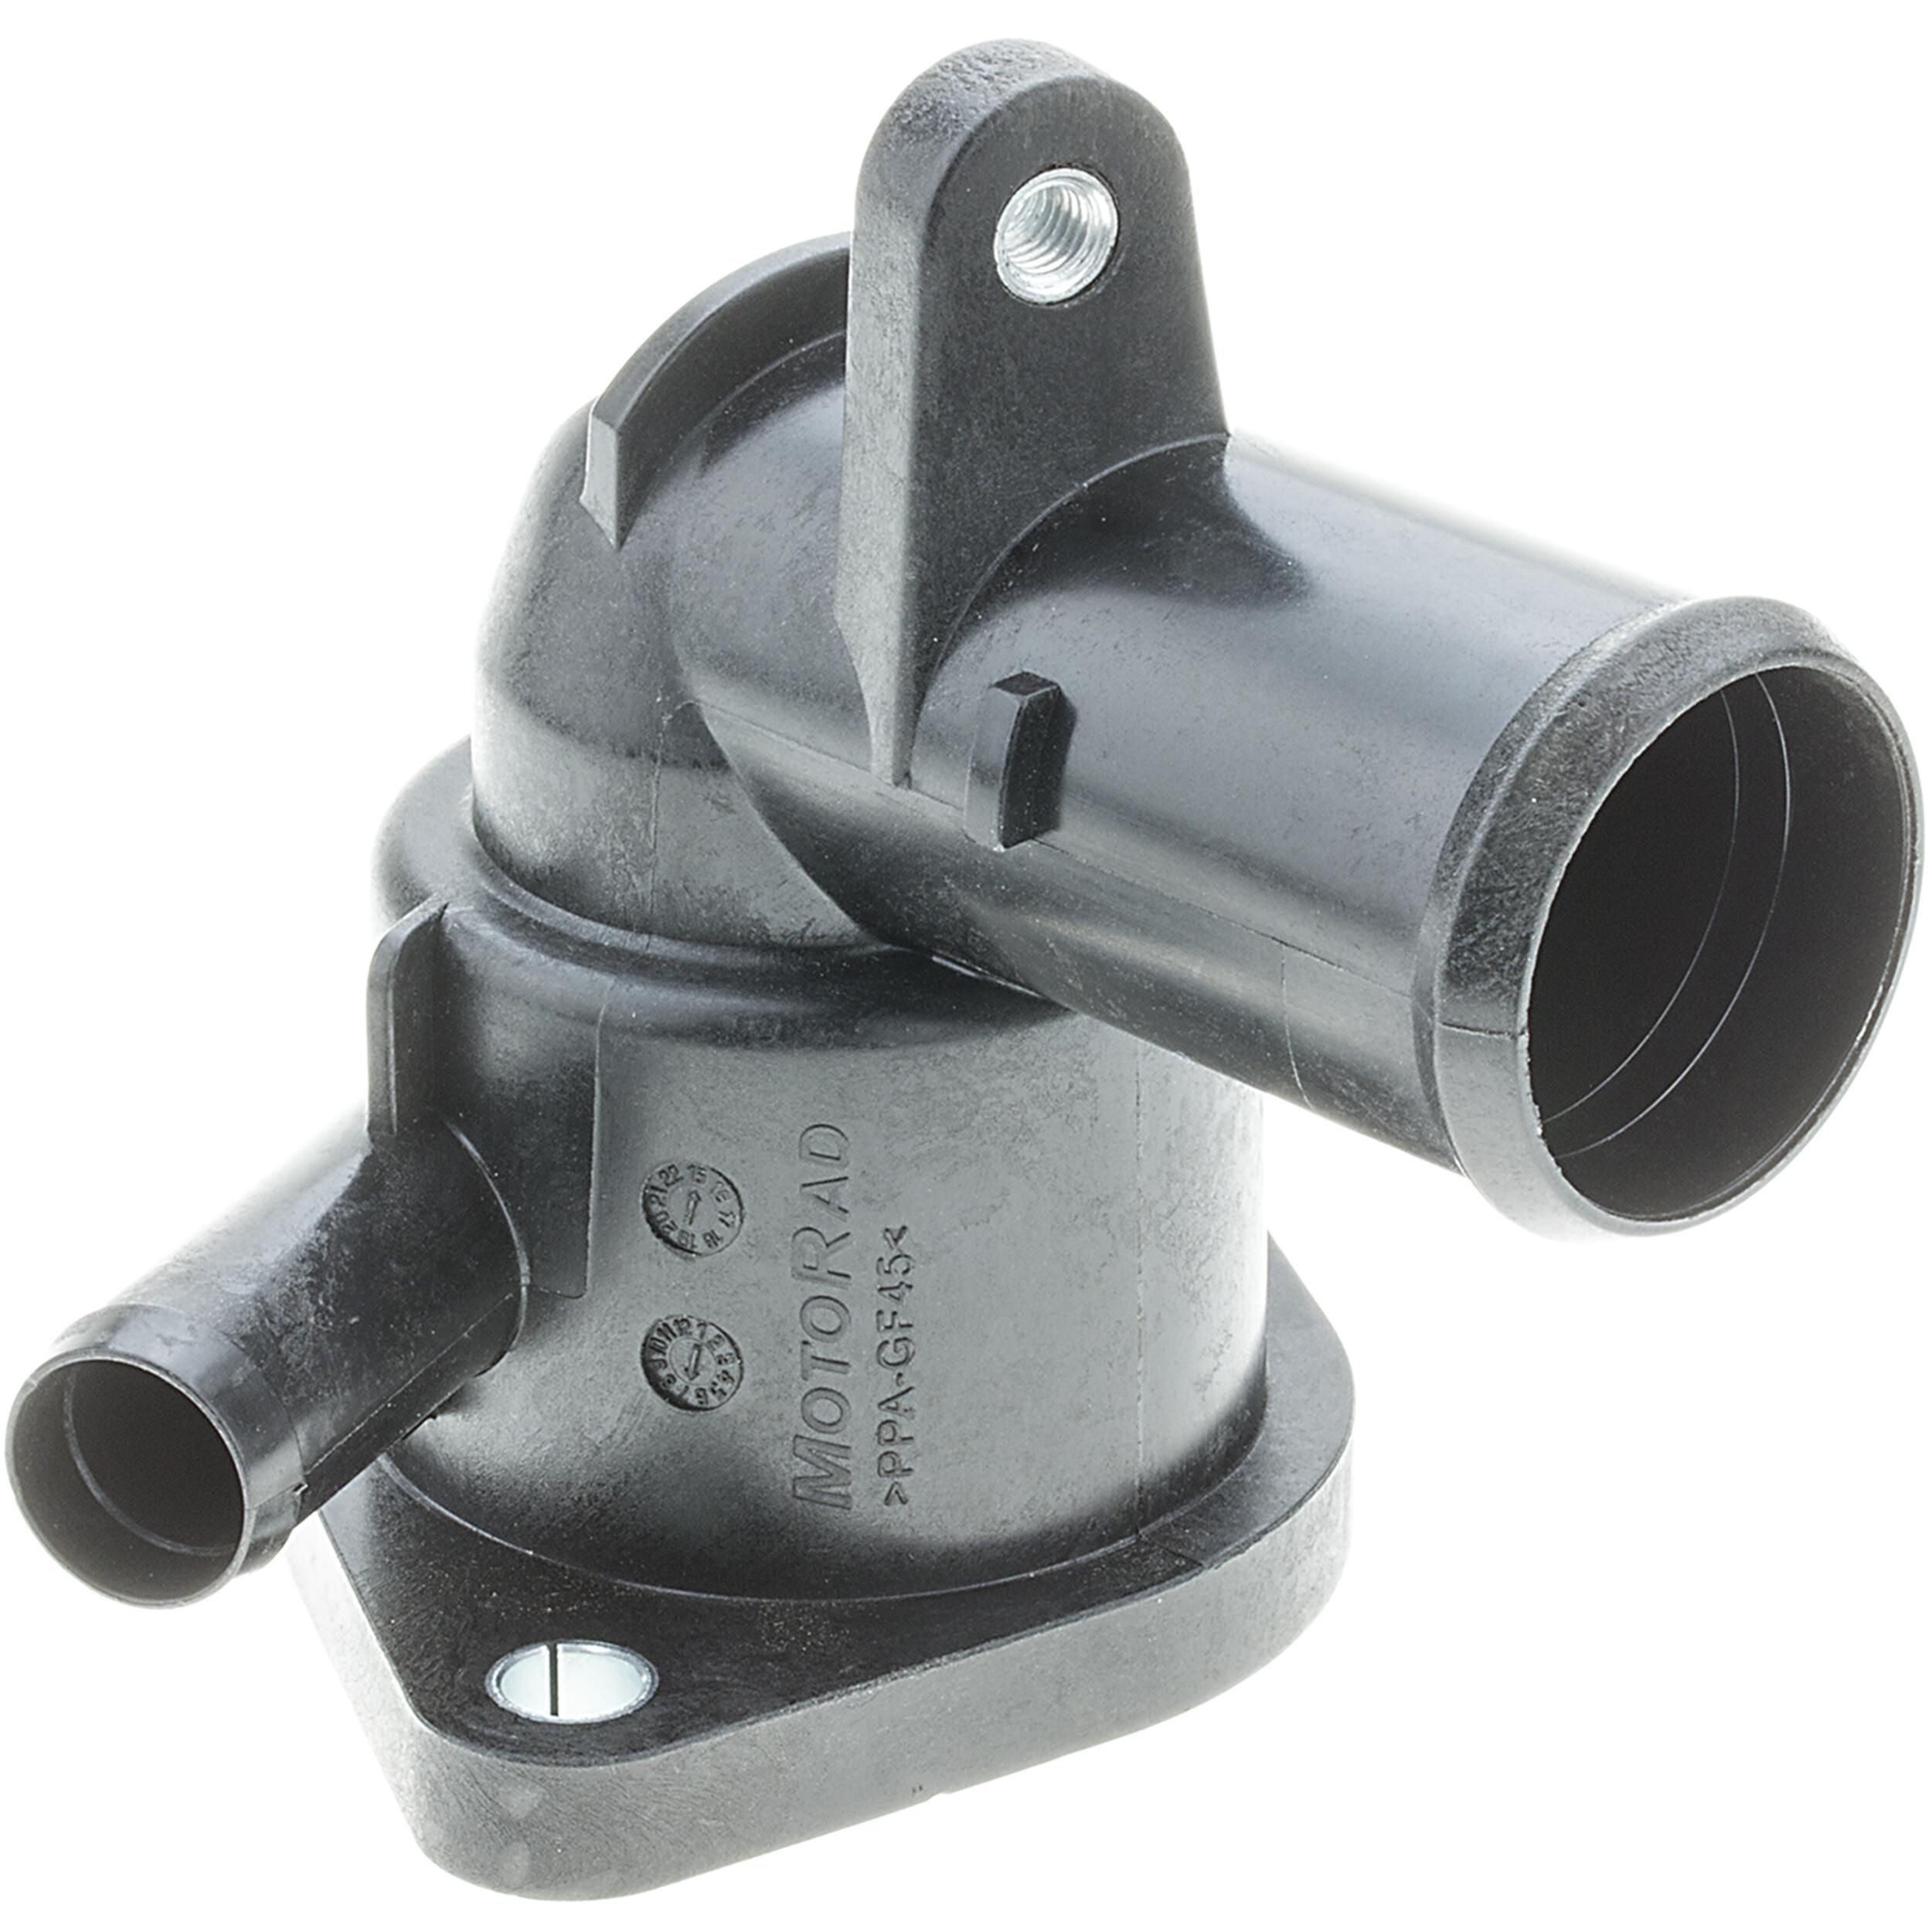 MOTORAD 756-82K Engine thermostat Opening Temperature: 82°C, with housing